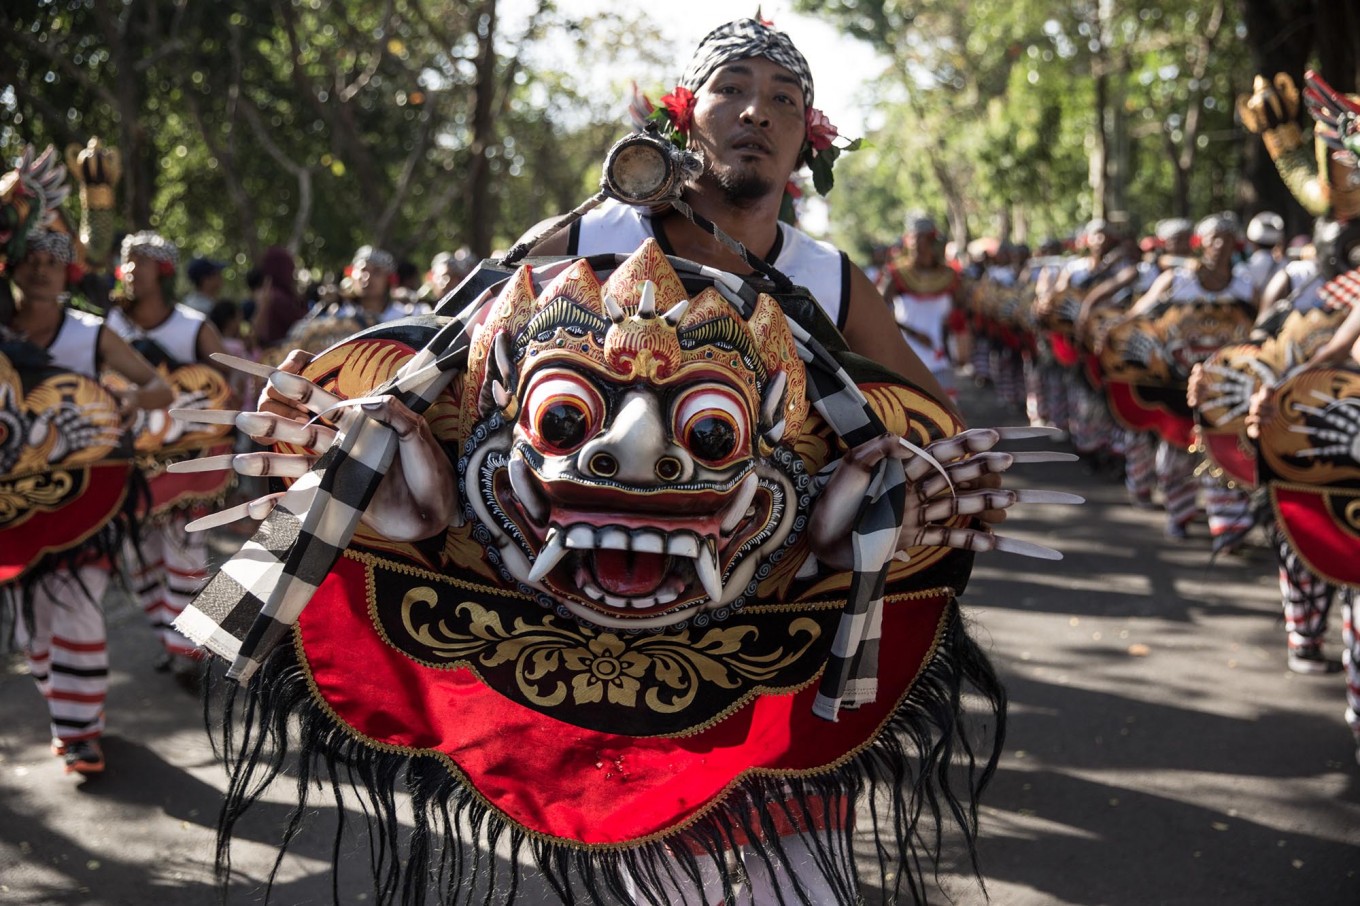 Balinese artists perform the Okokan dance during the opening of the 39th Bali Art Festival at the Bajra Sandhi Monument in Denpasar. Image: JP/Agung Parameswara